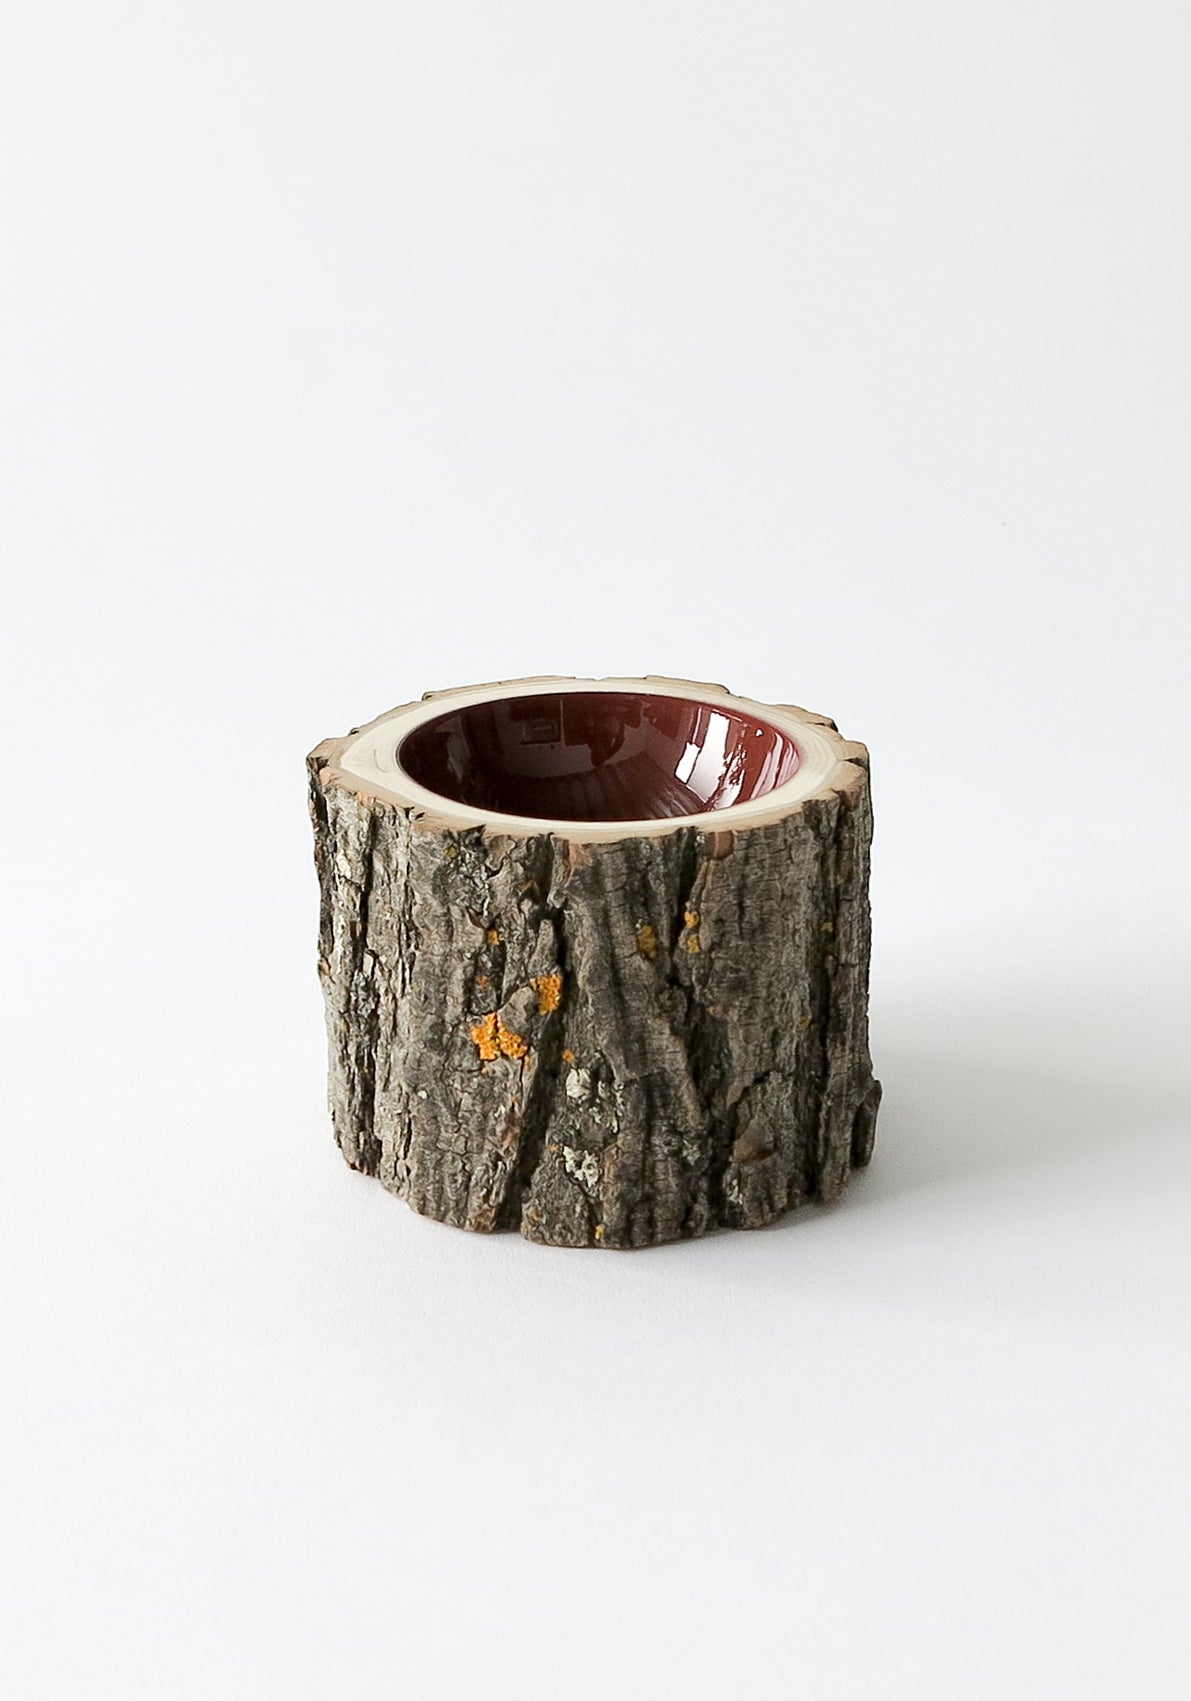 Size 4 Log Bowl by Loyal Loot - small-medium wooden bowl with rough bark, glossy interior is a rick dark red current colour.